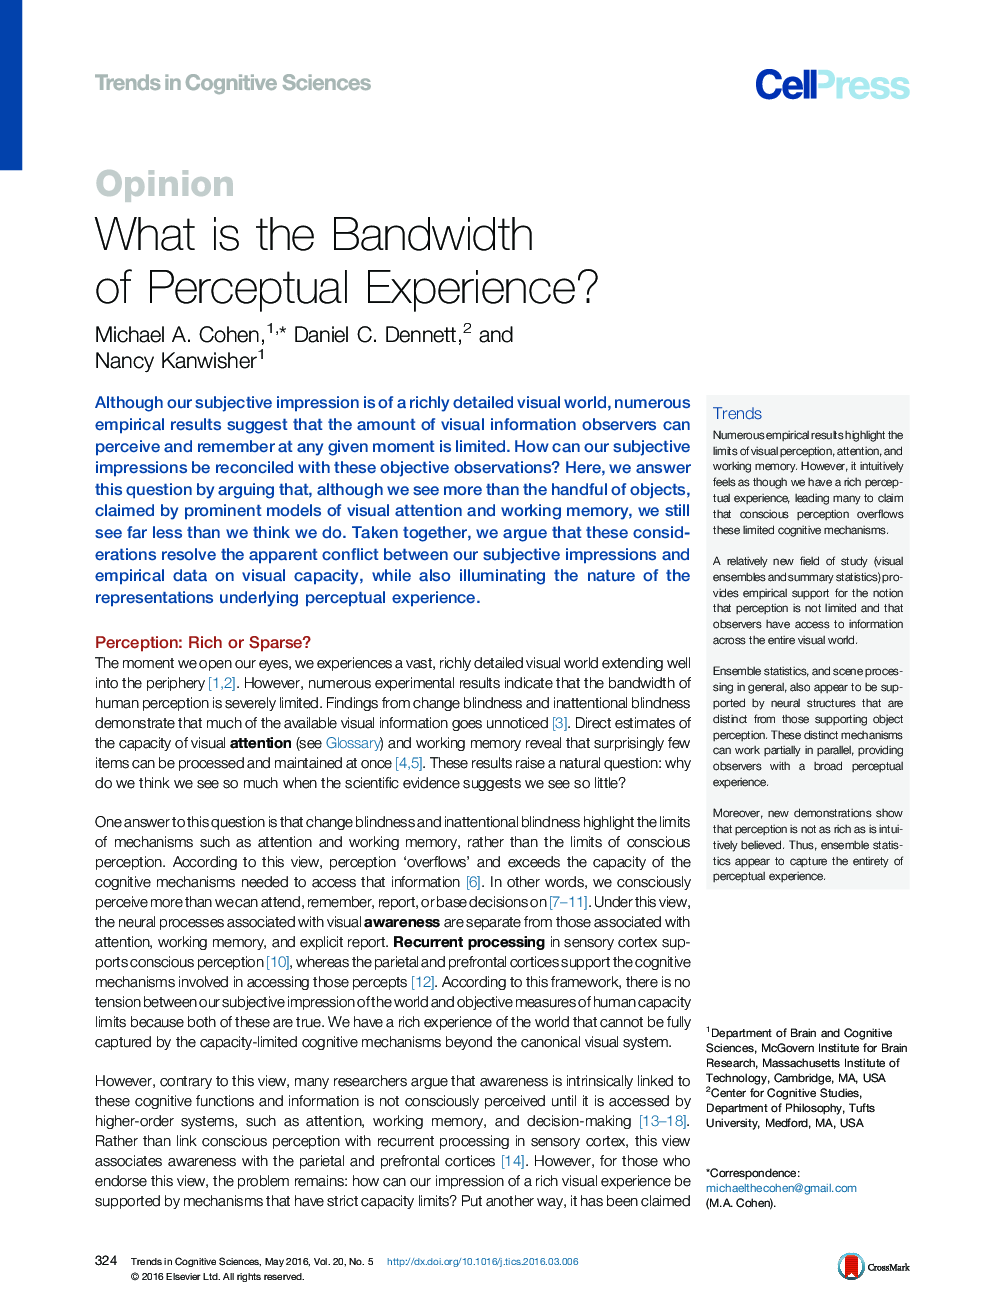 What is the Bandwidth of Perceptual Experience?